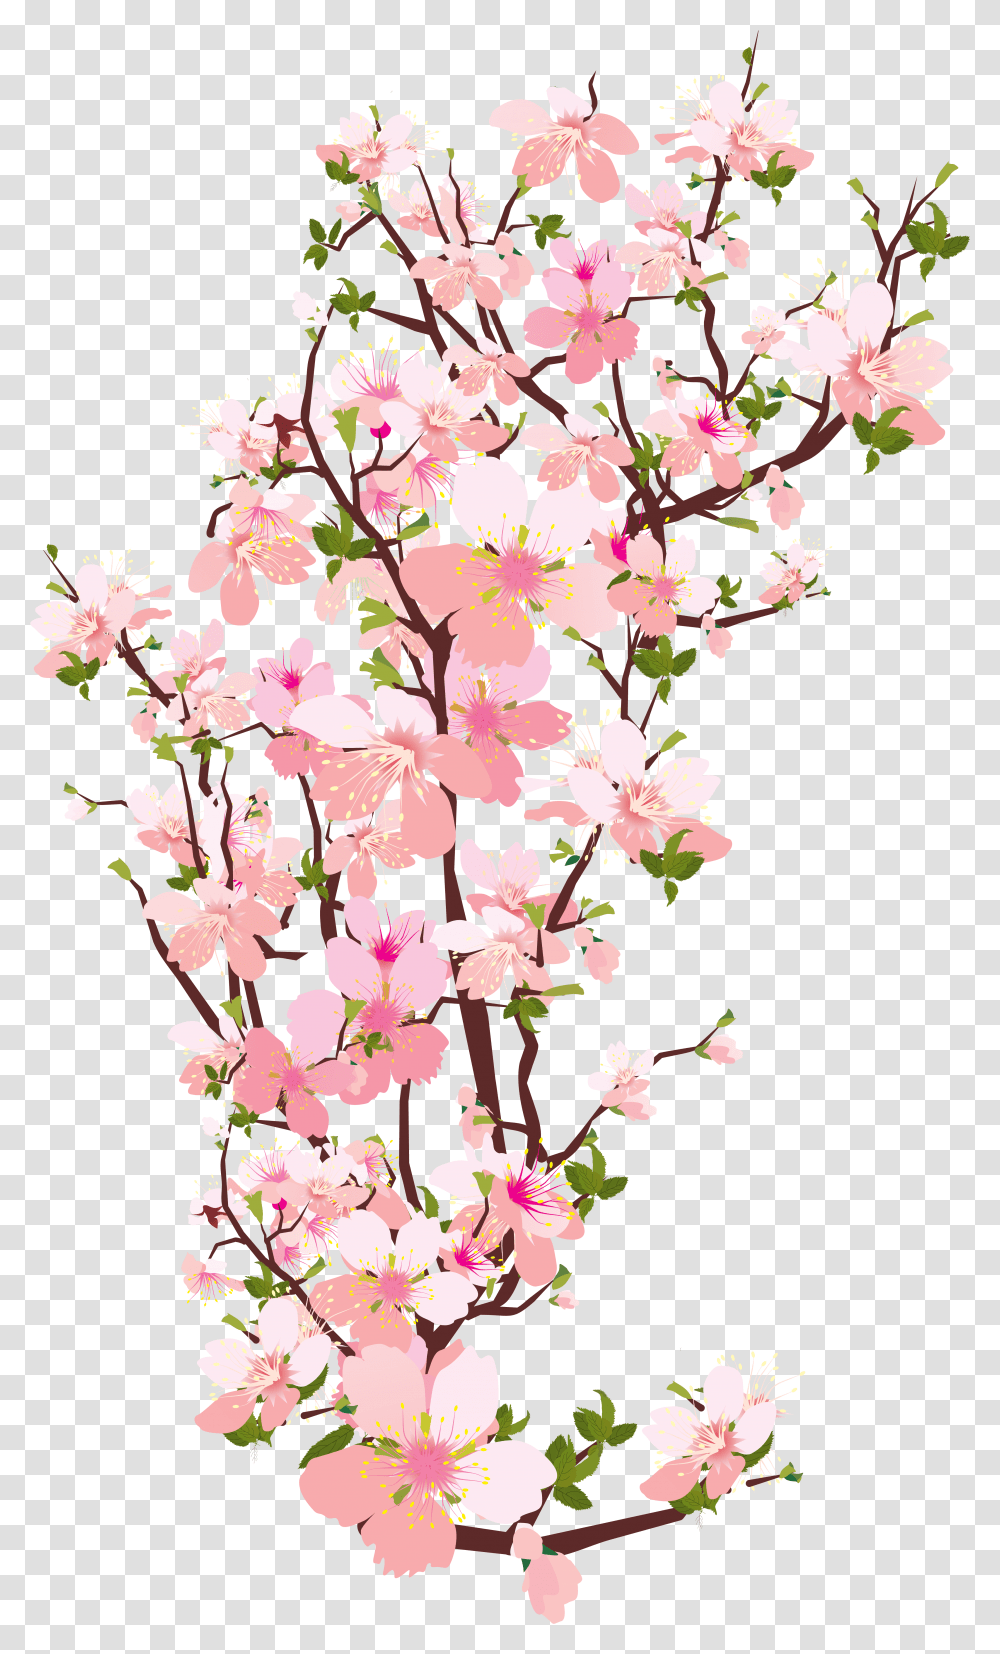 Spring Blossom & Clipart Free Background Cherry Blossom Clipart, Plant, Flower, Graphics, Floral Design Transparent Png